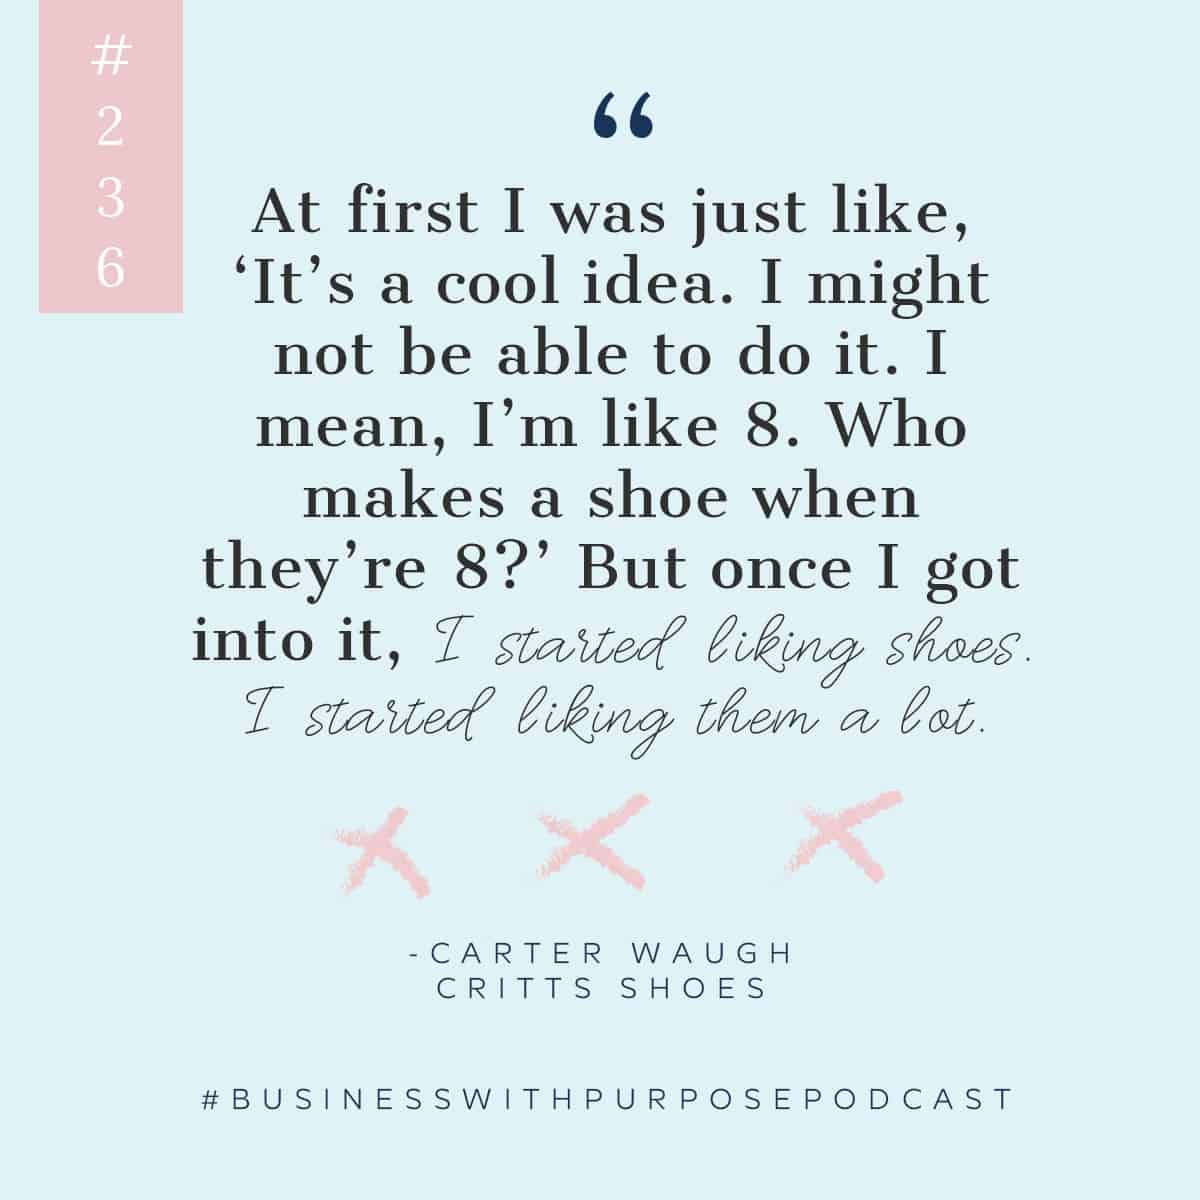 Shoes For Kids, Created By a Kid | Business with Purpose Podcast EP 236: Carter Waugh, Critts Shoes